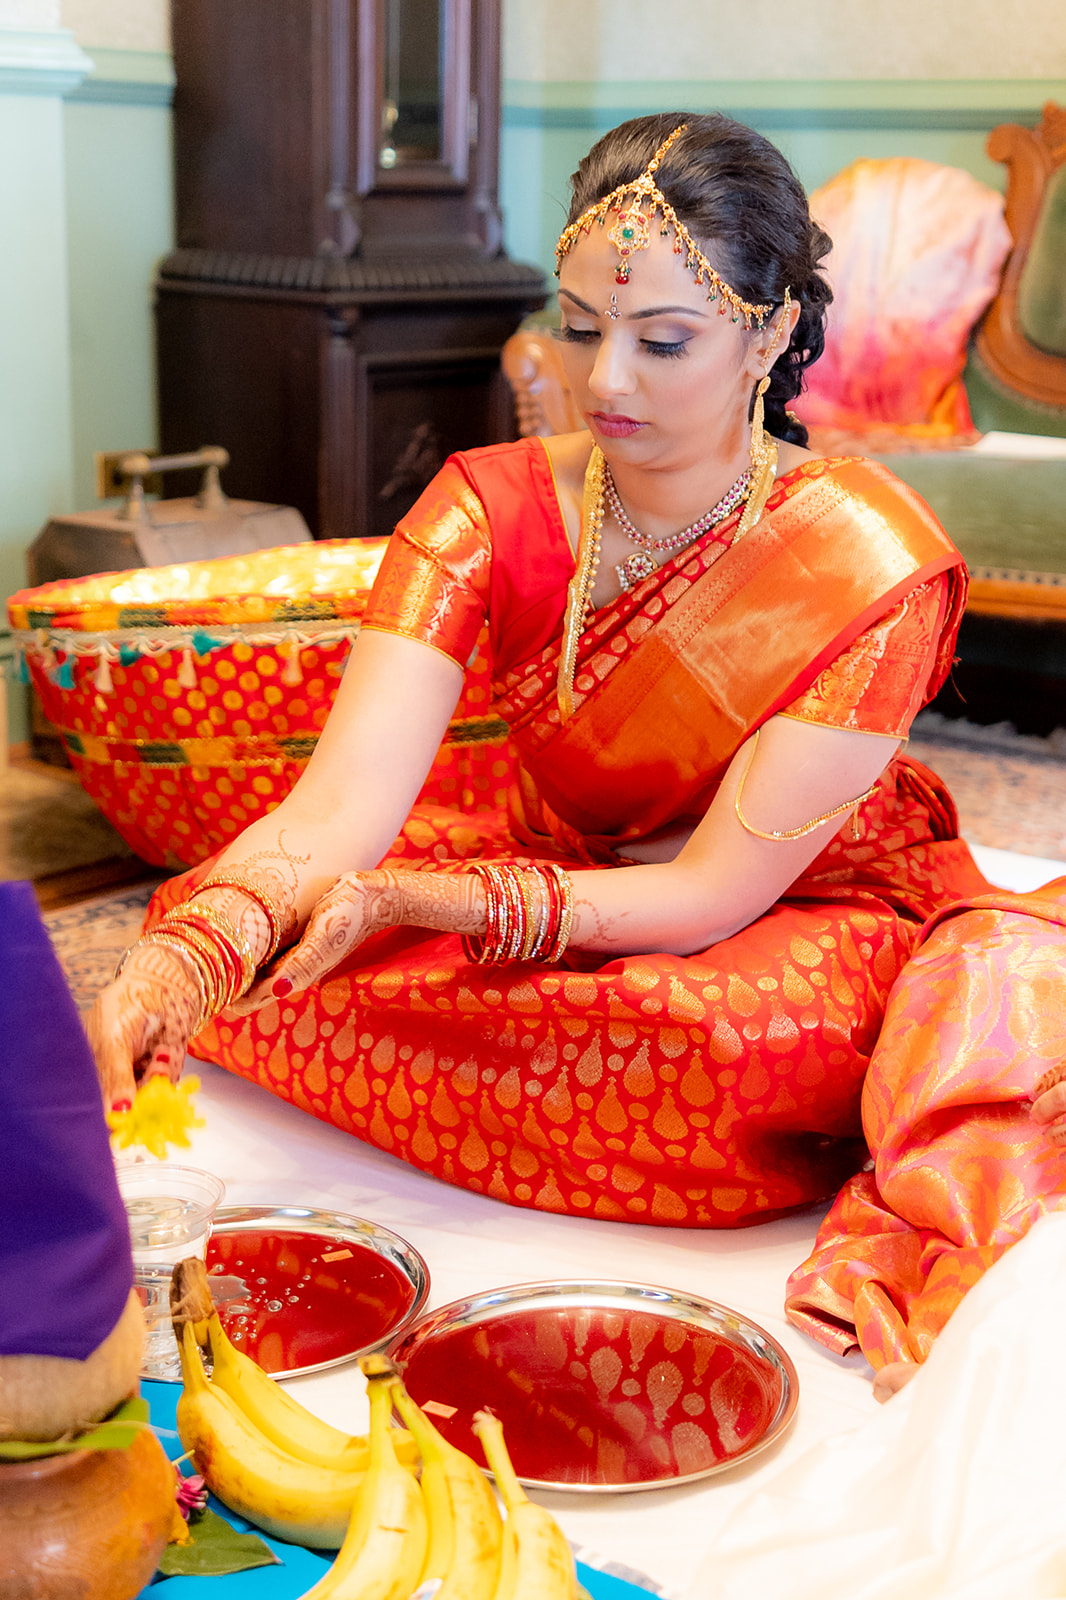 Indian bride accepts wedding spices and fruits blessings before wedding ceremony.